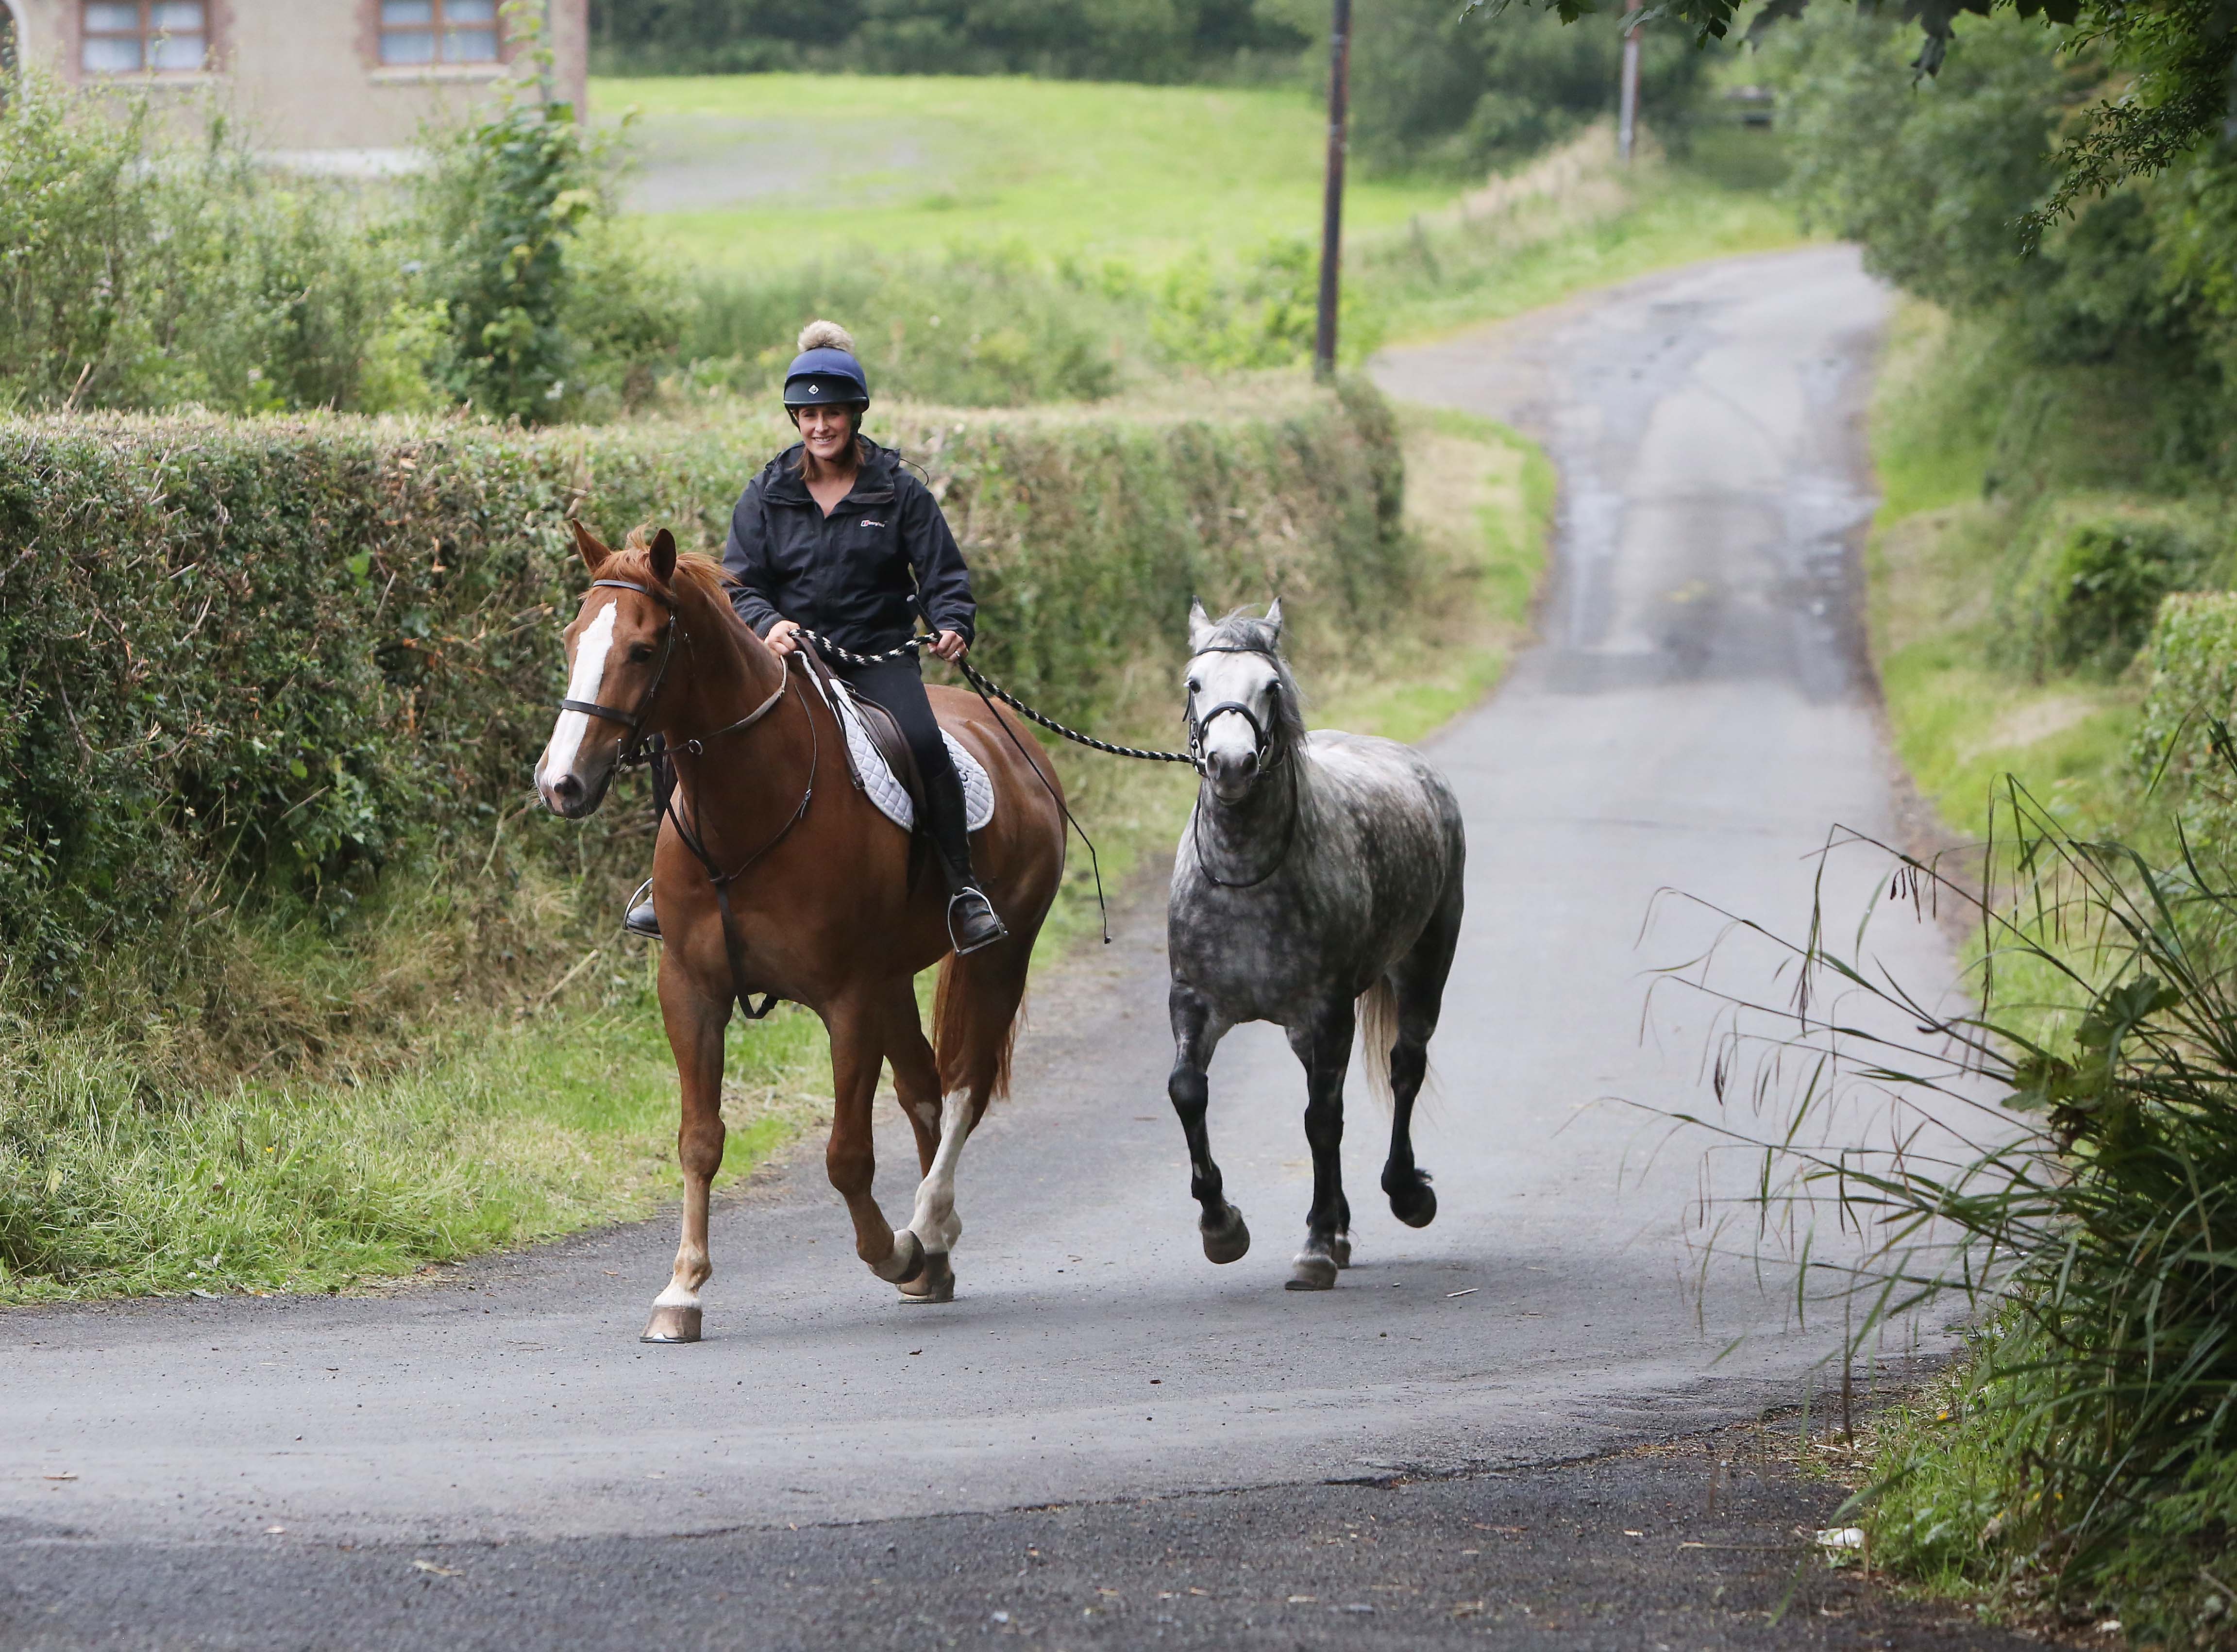 FOLLOWING THE LEADER: A rider leads a horse along a country road outside Lisburn on Sunday afternoon